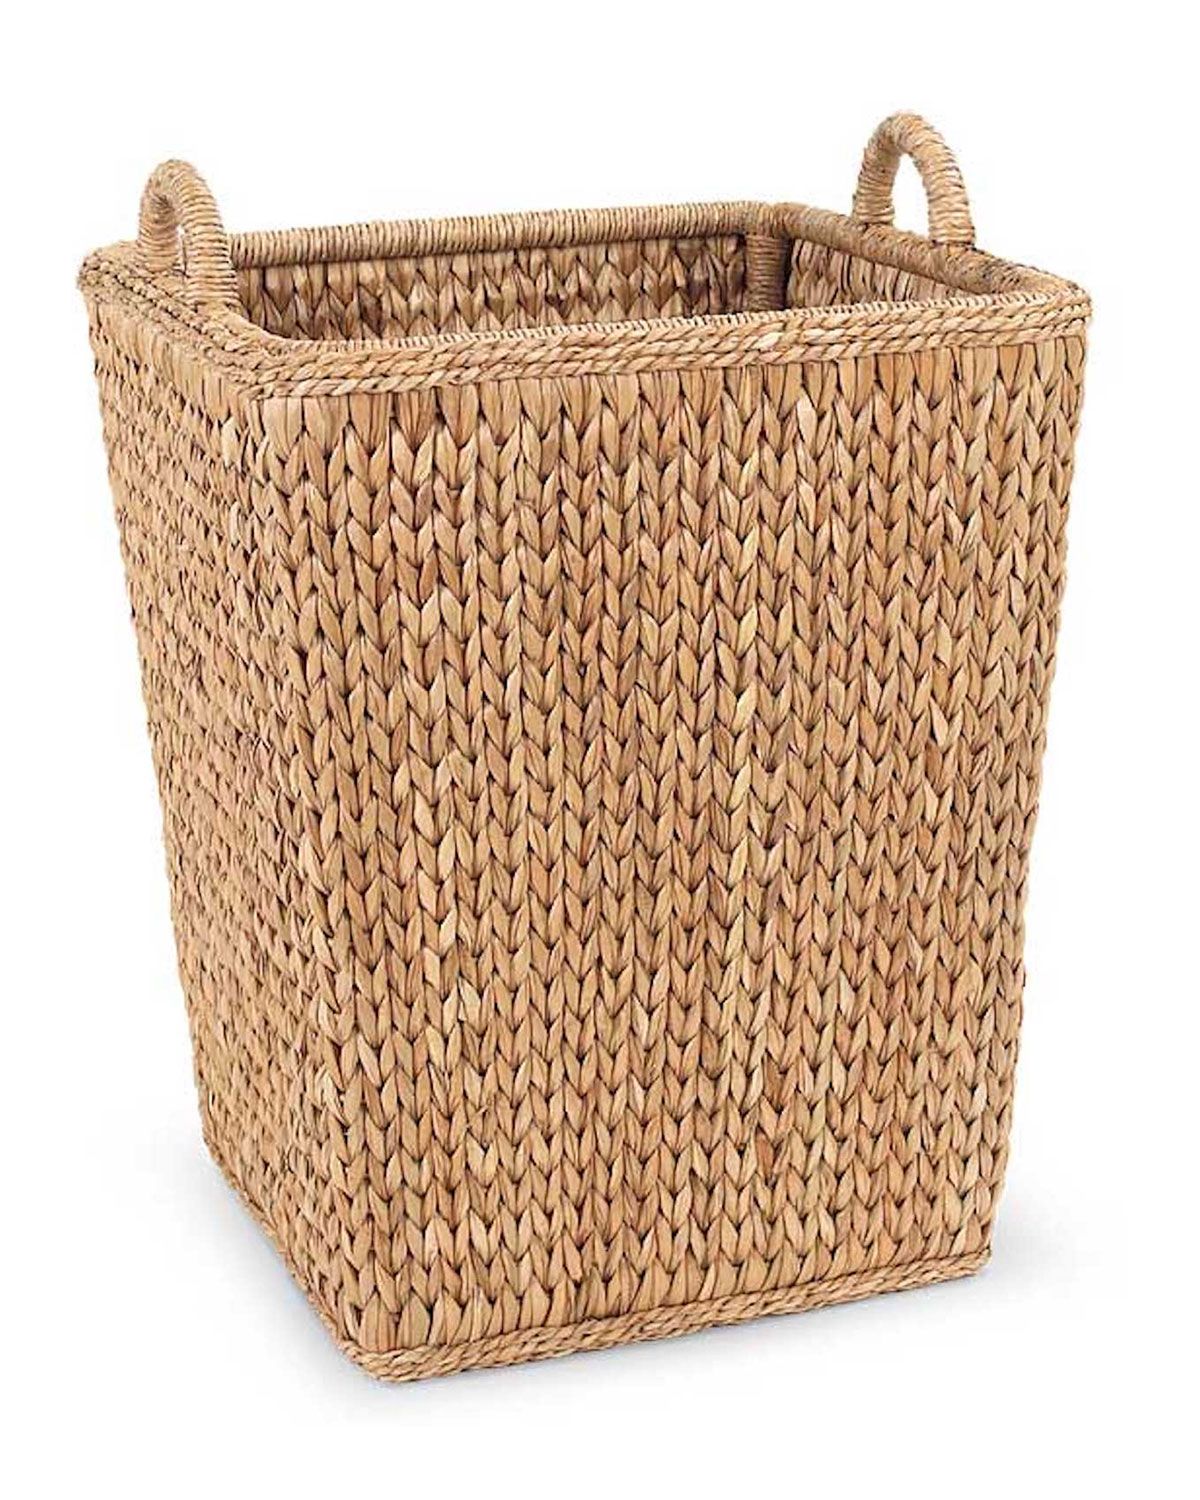 Sweater Weave Orchard Basket | Horchow